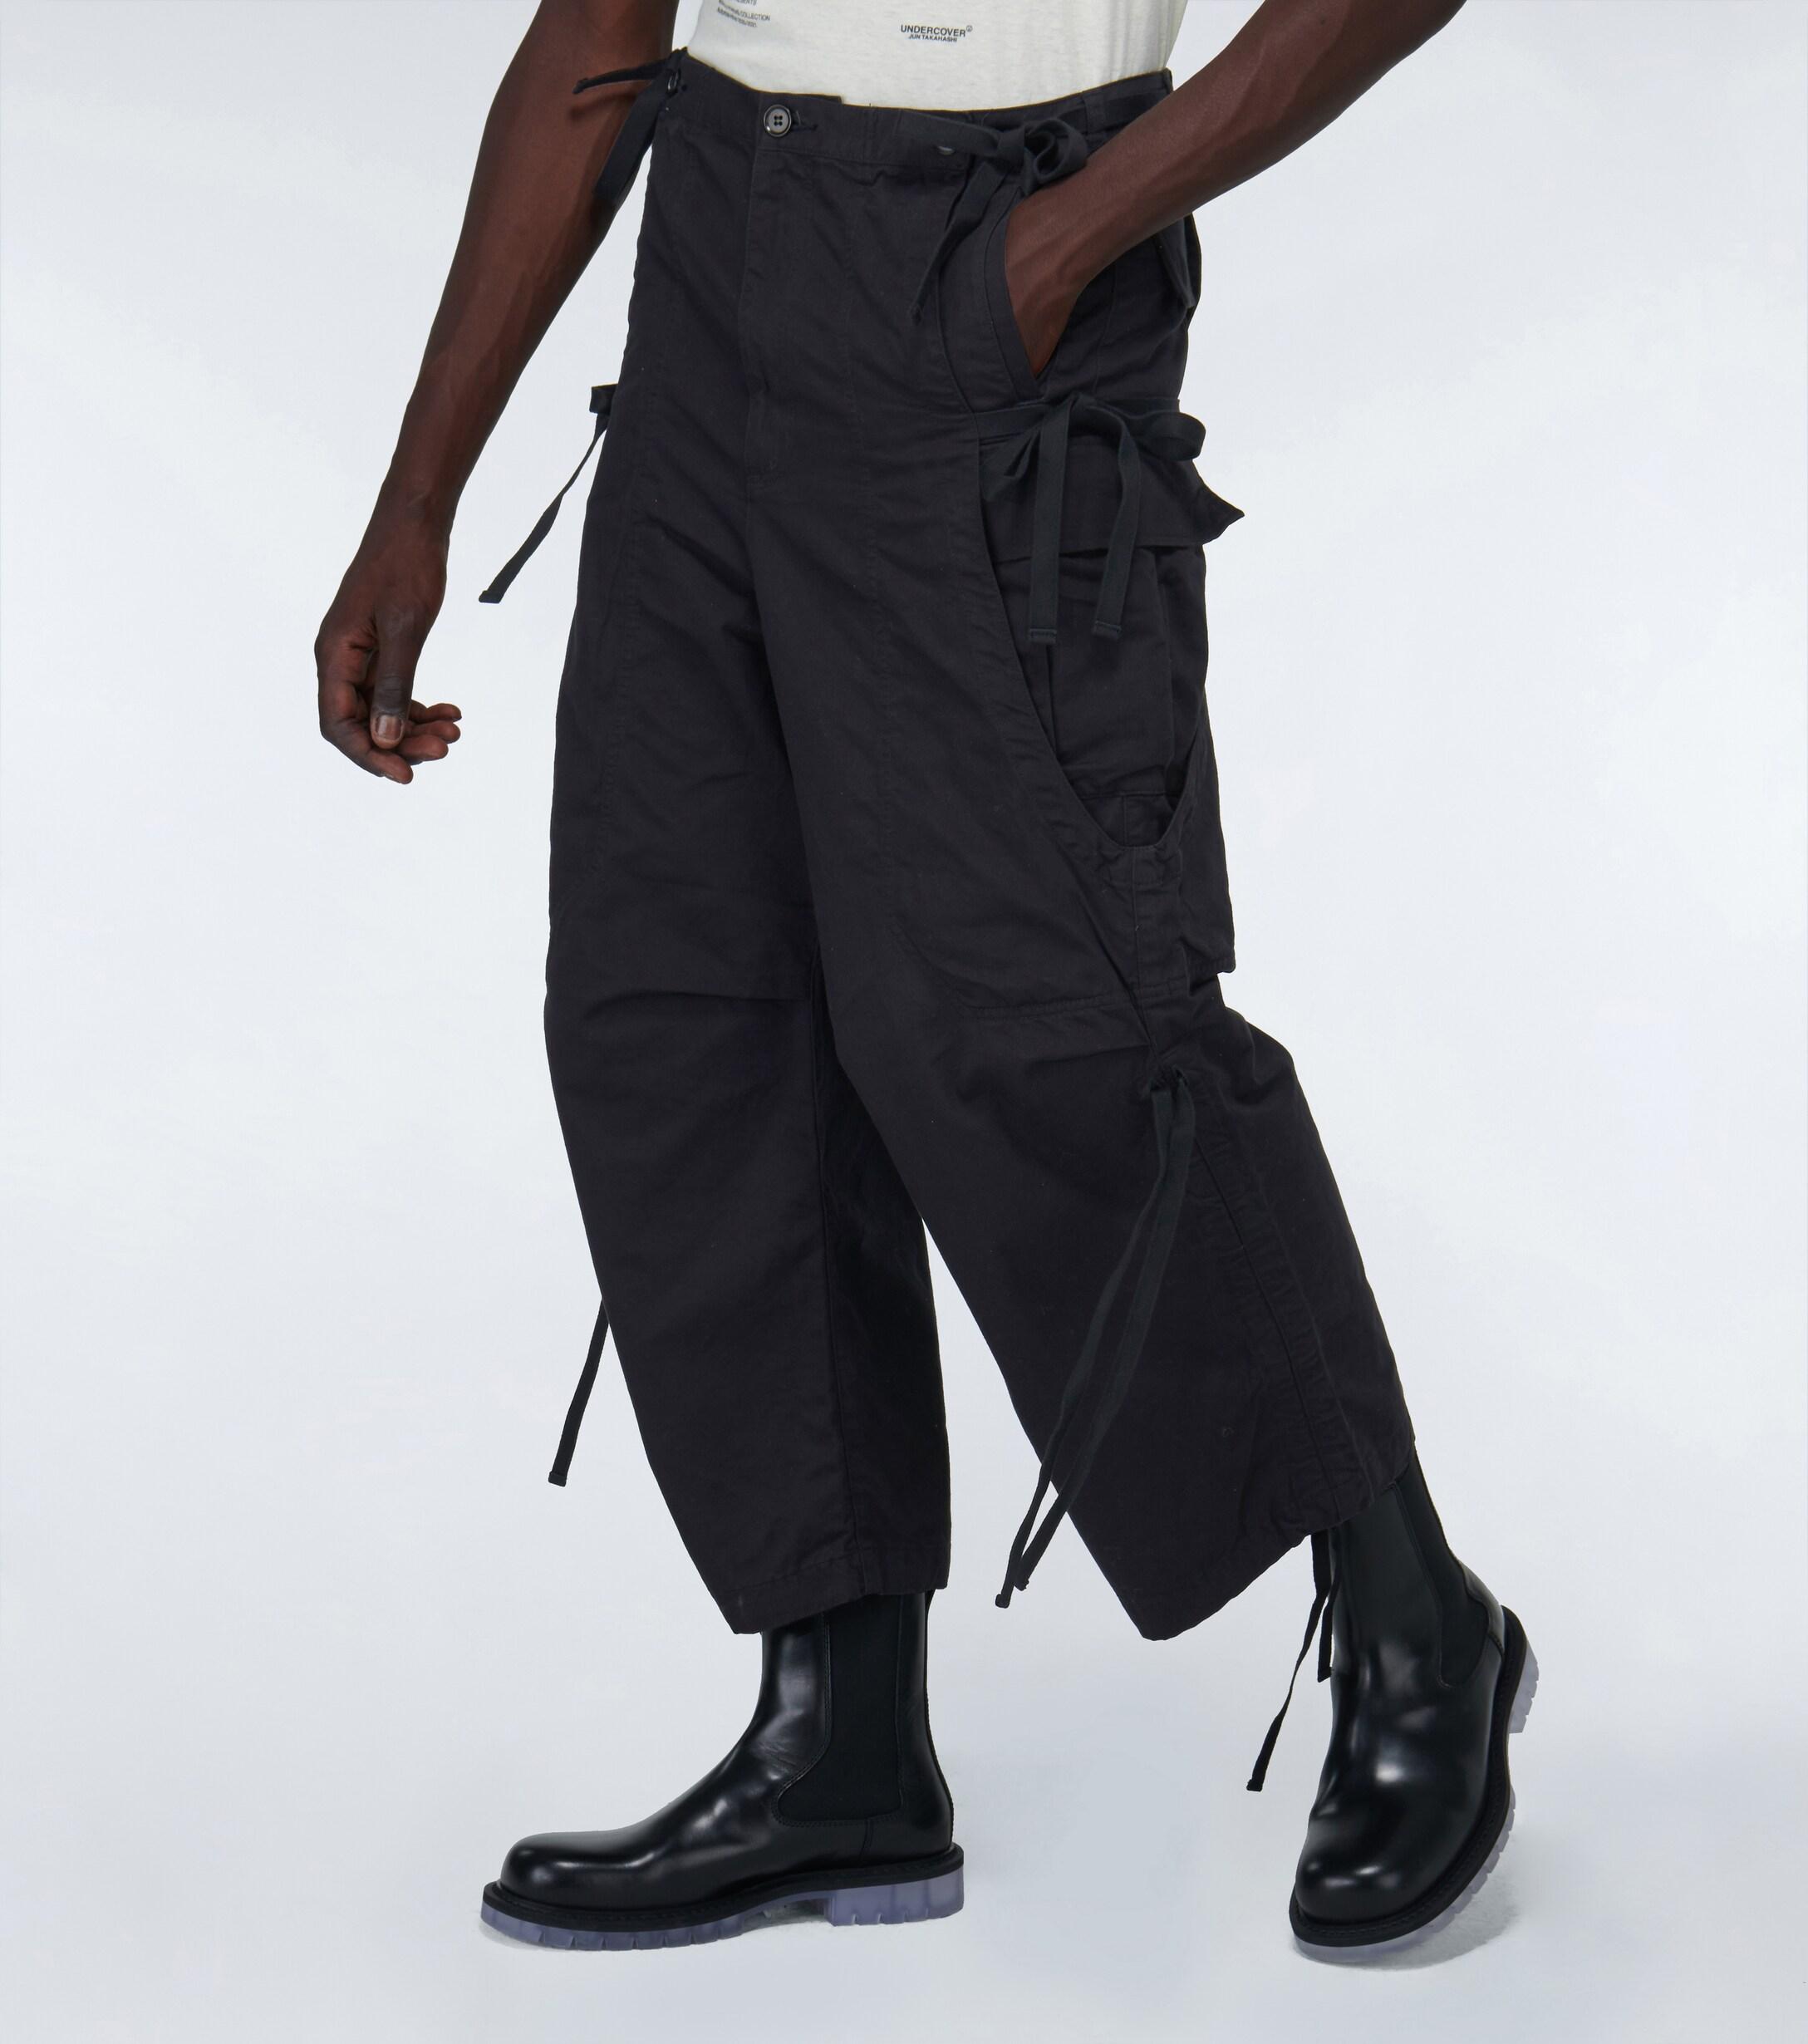 Undercover Cotton Cargo Pants in Black for Men - Lyst